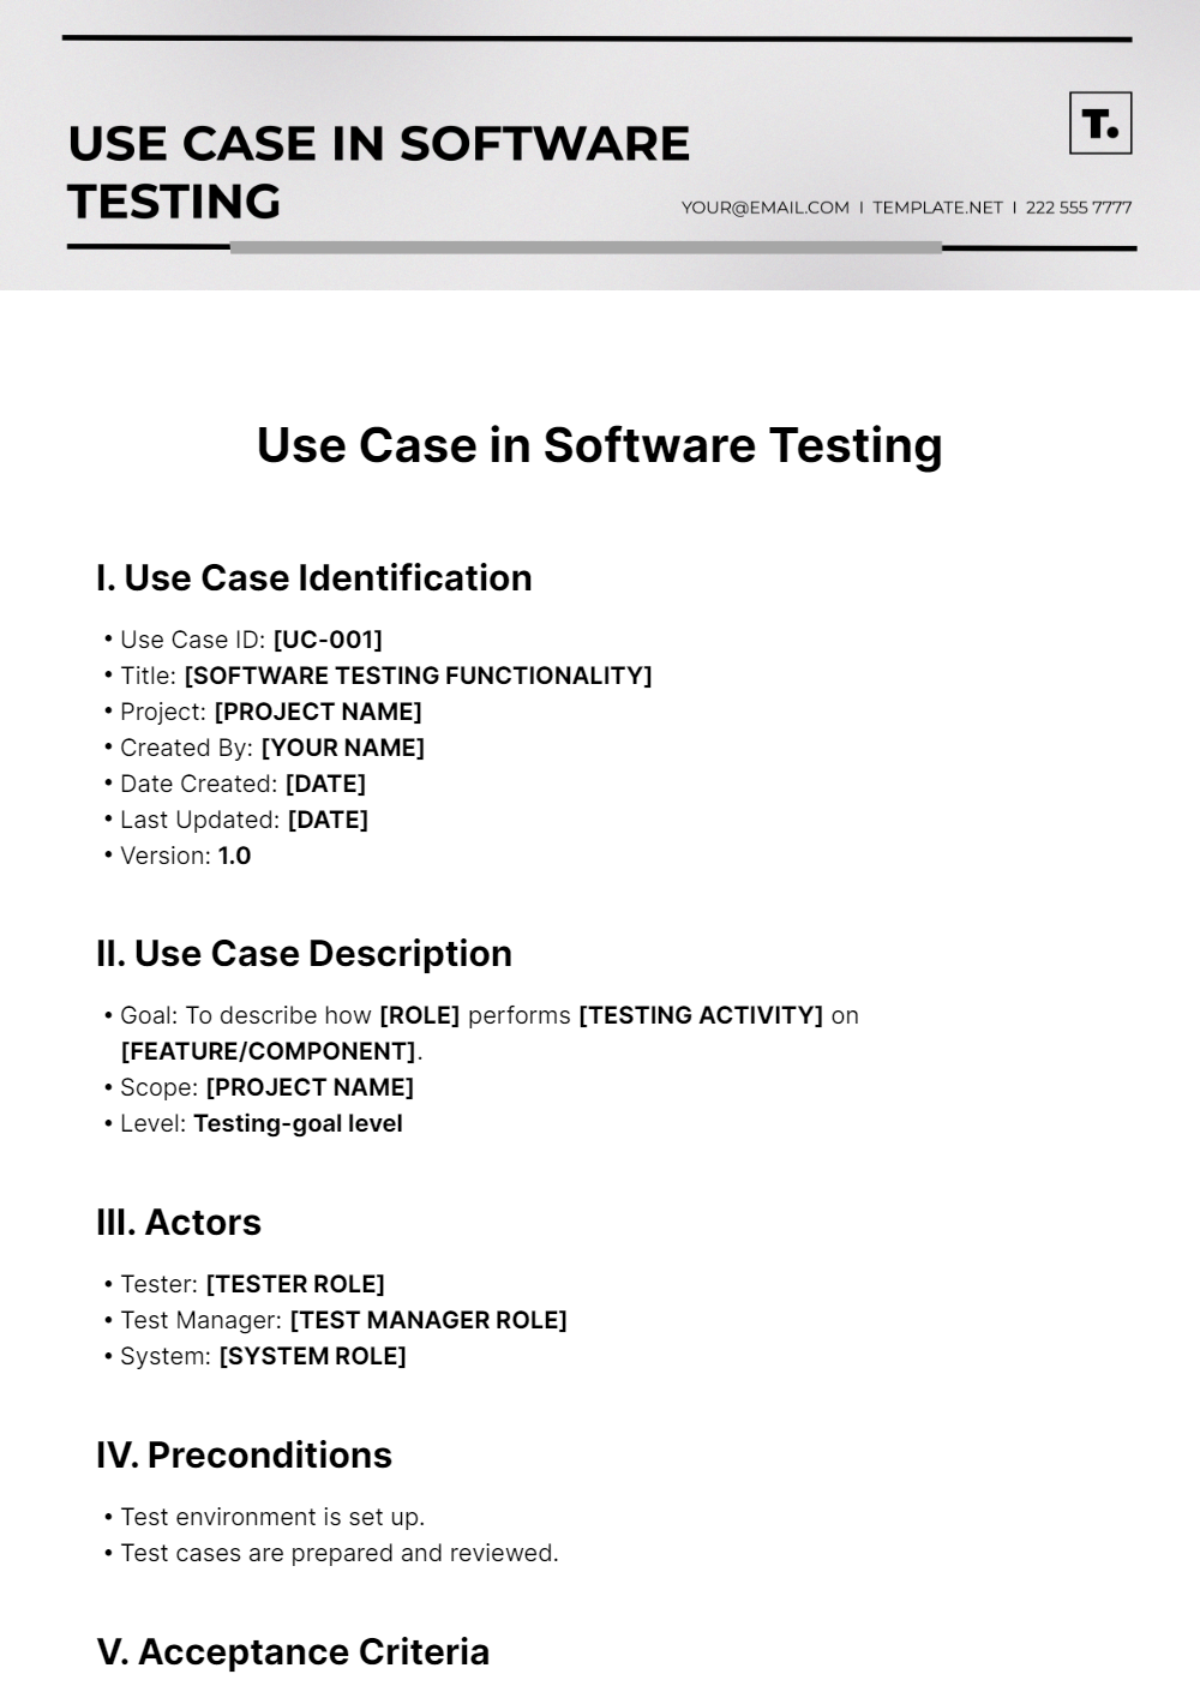 Use Case in Software Testing Template